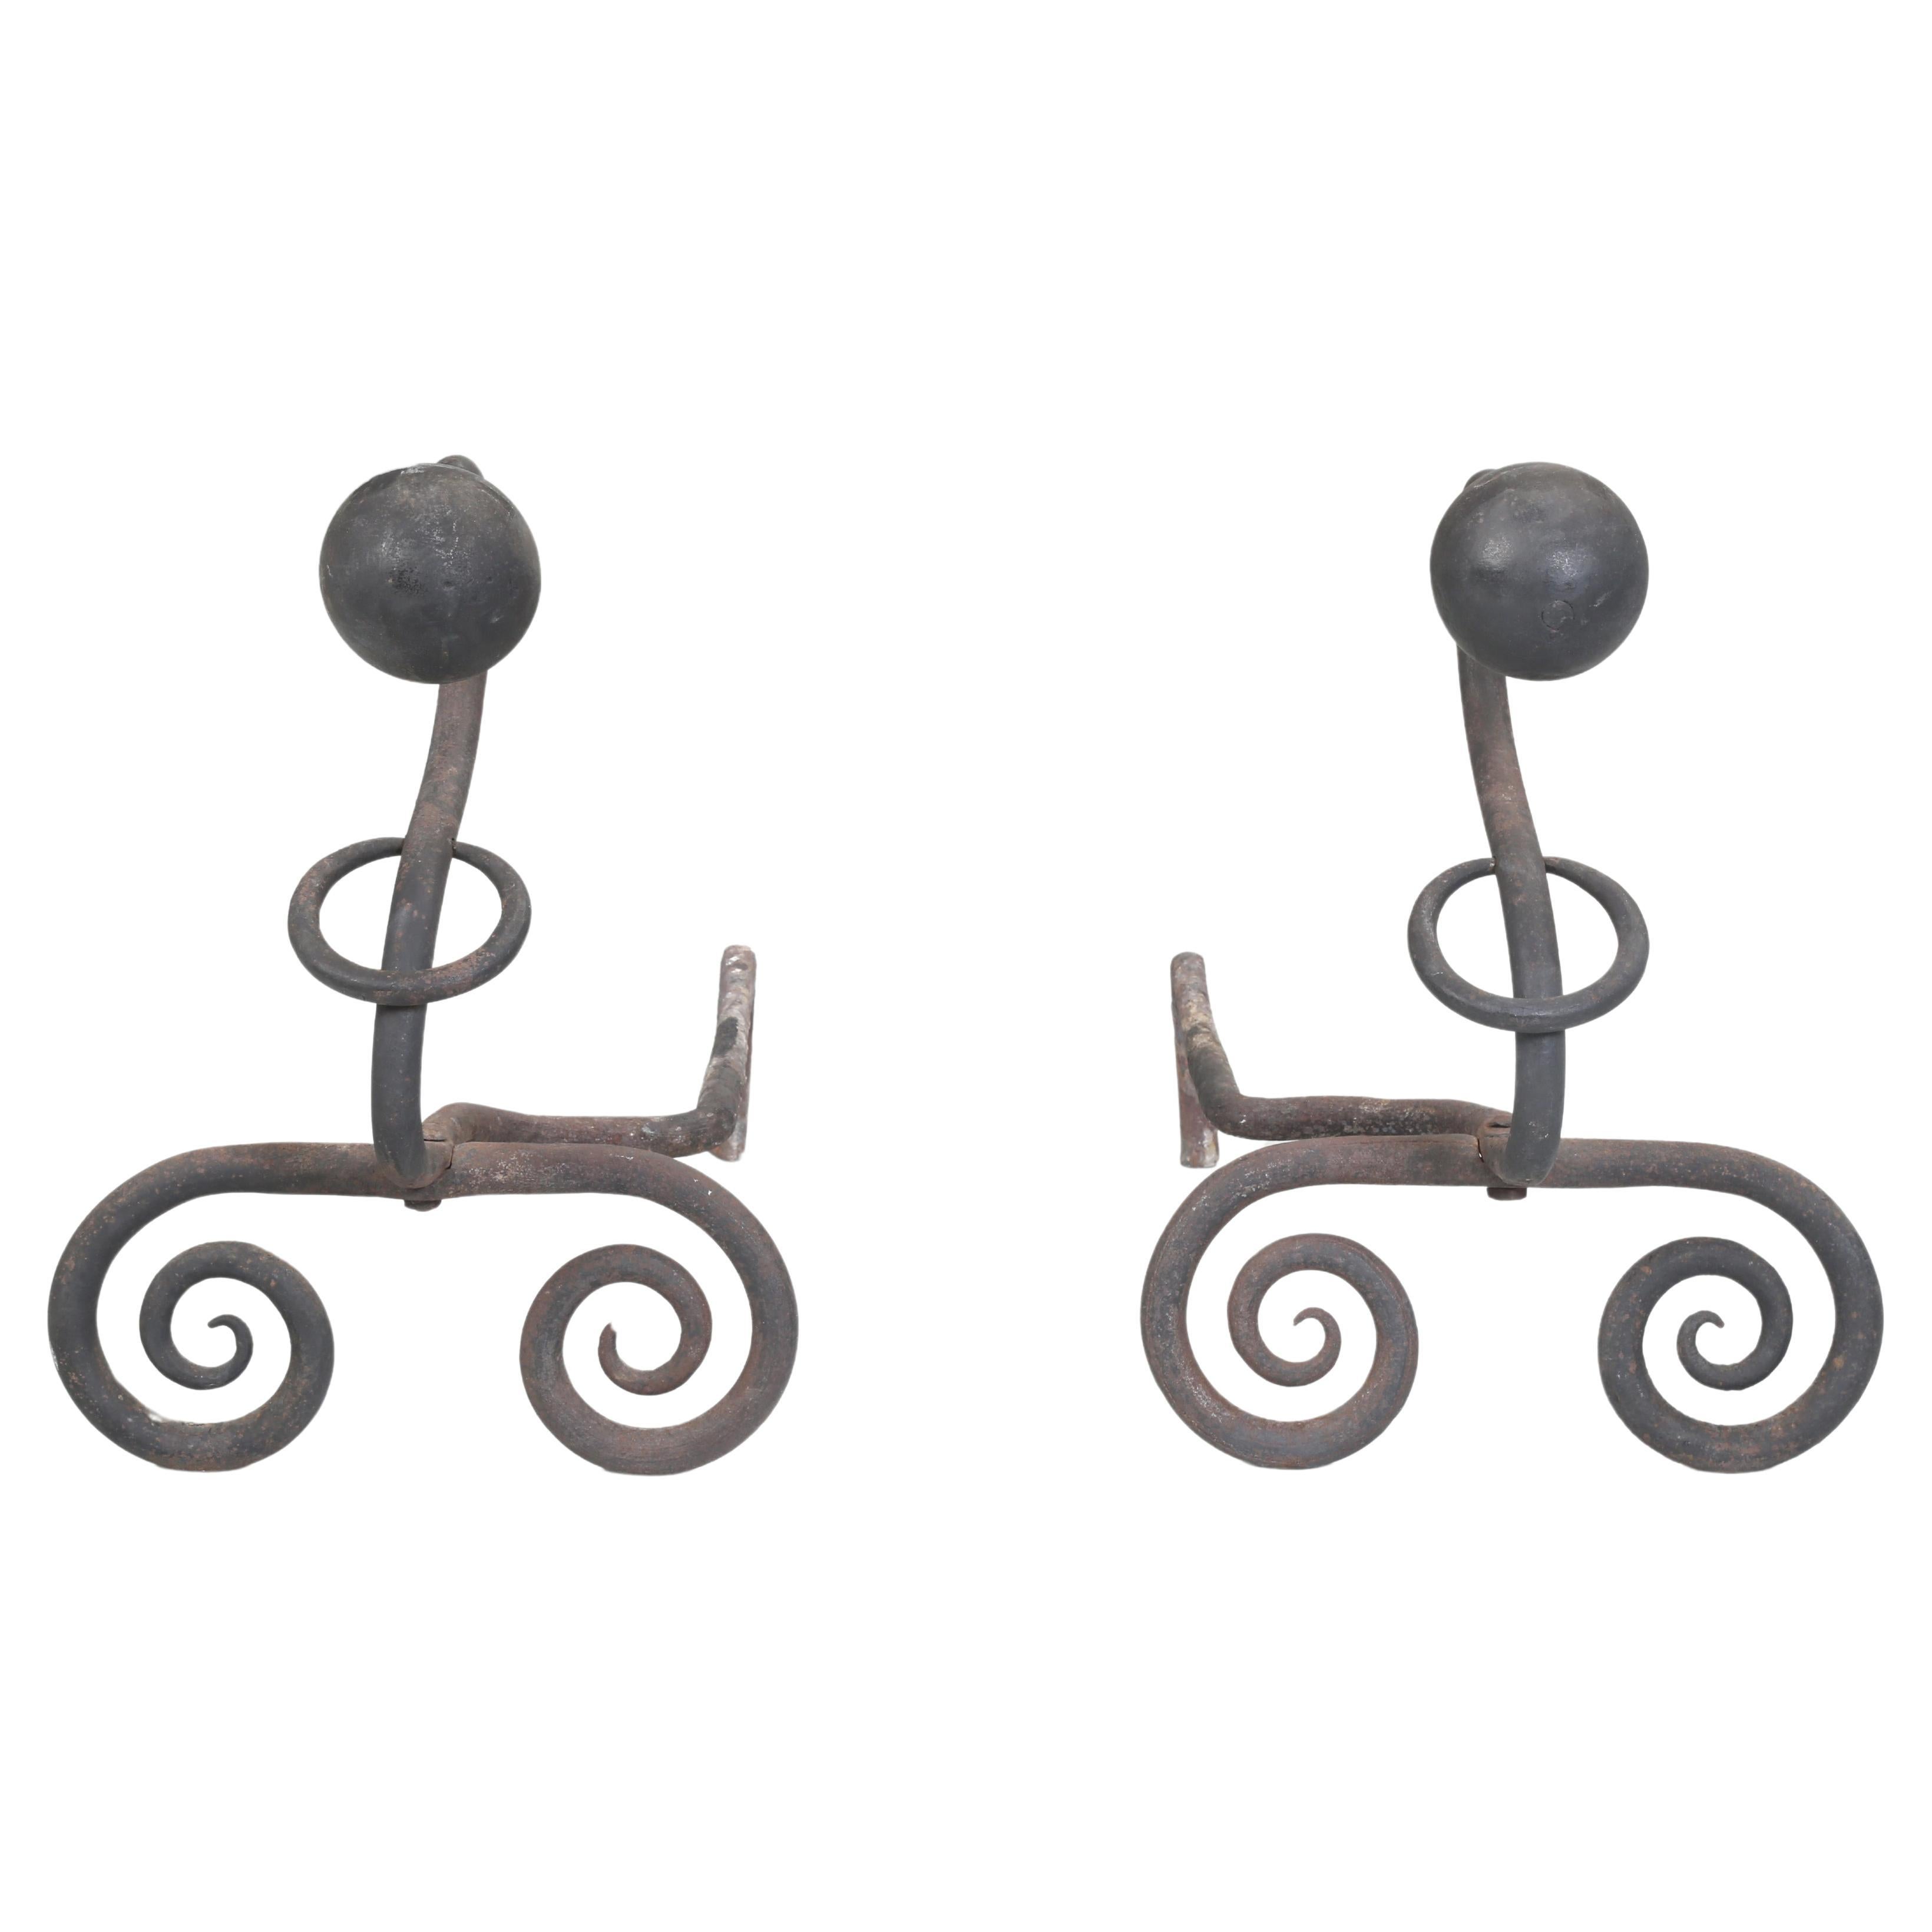 Wrought Iron Fireplace Andirons. Modernist Curled Form with Sphere Top c1940's For Sale